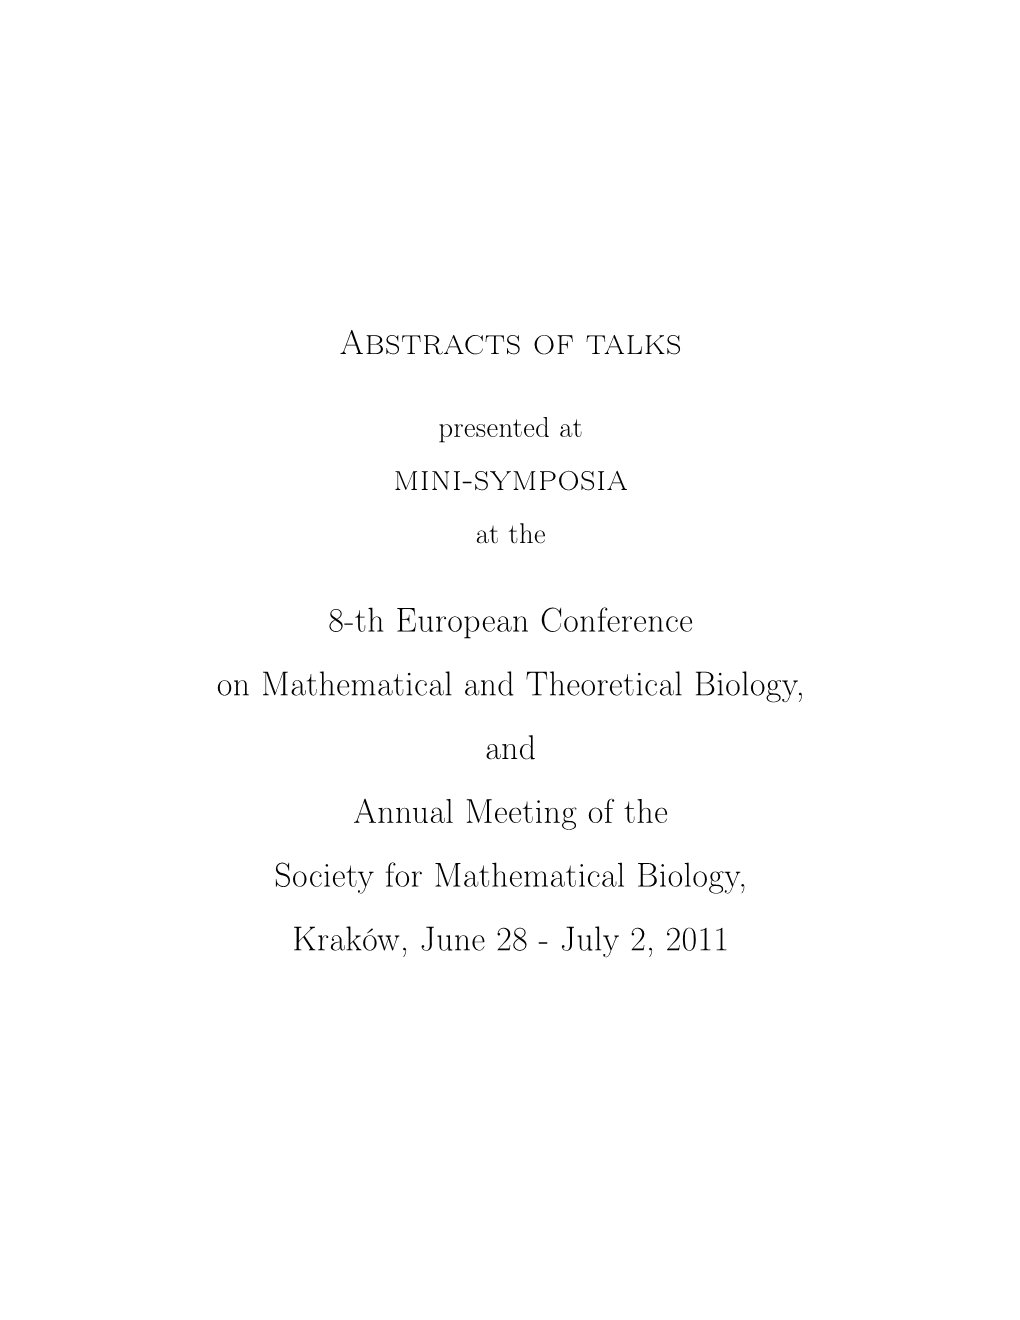 Abstracts of Talks at Mini-Symposia